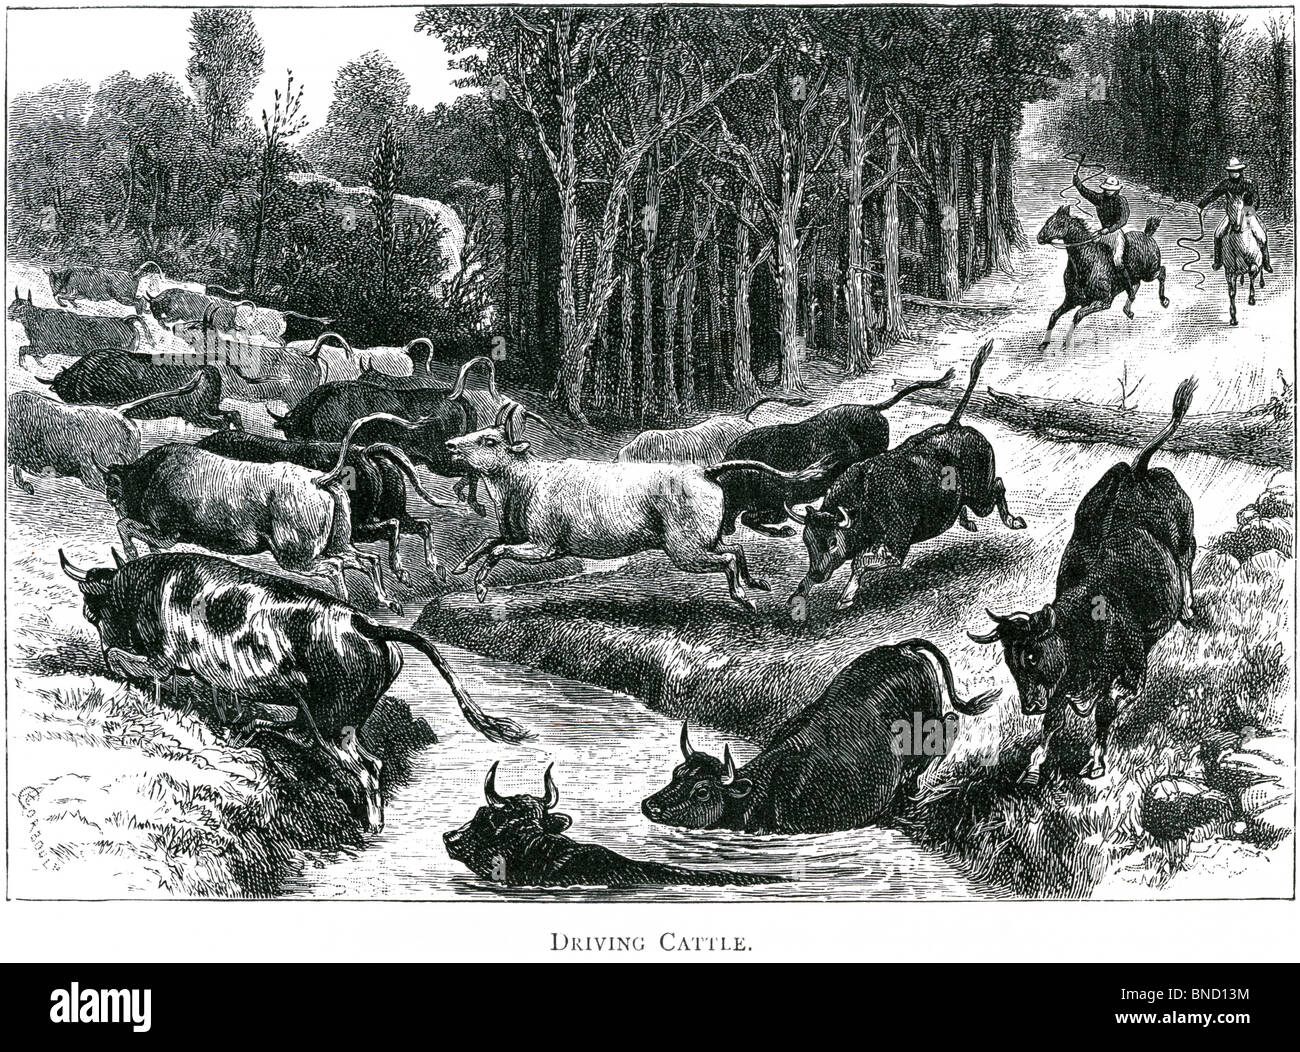 An engraving entitled 'Driving Cattle' - published in a book about Australia printed in 1886. Stock Photo